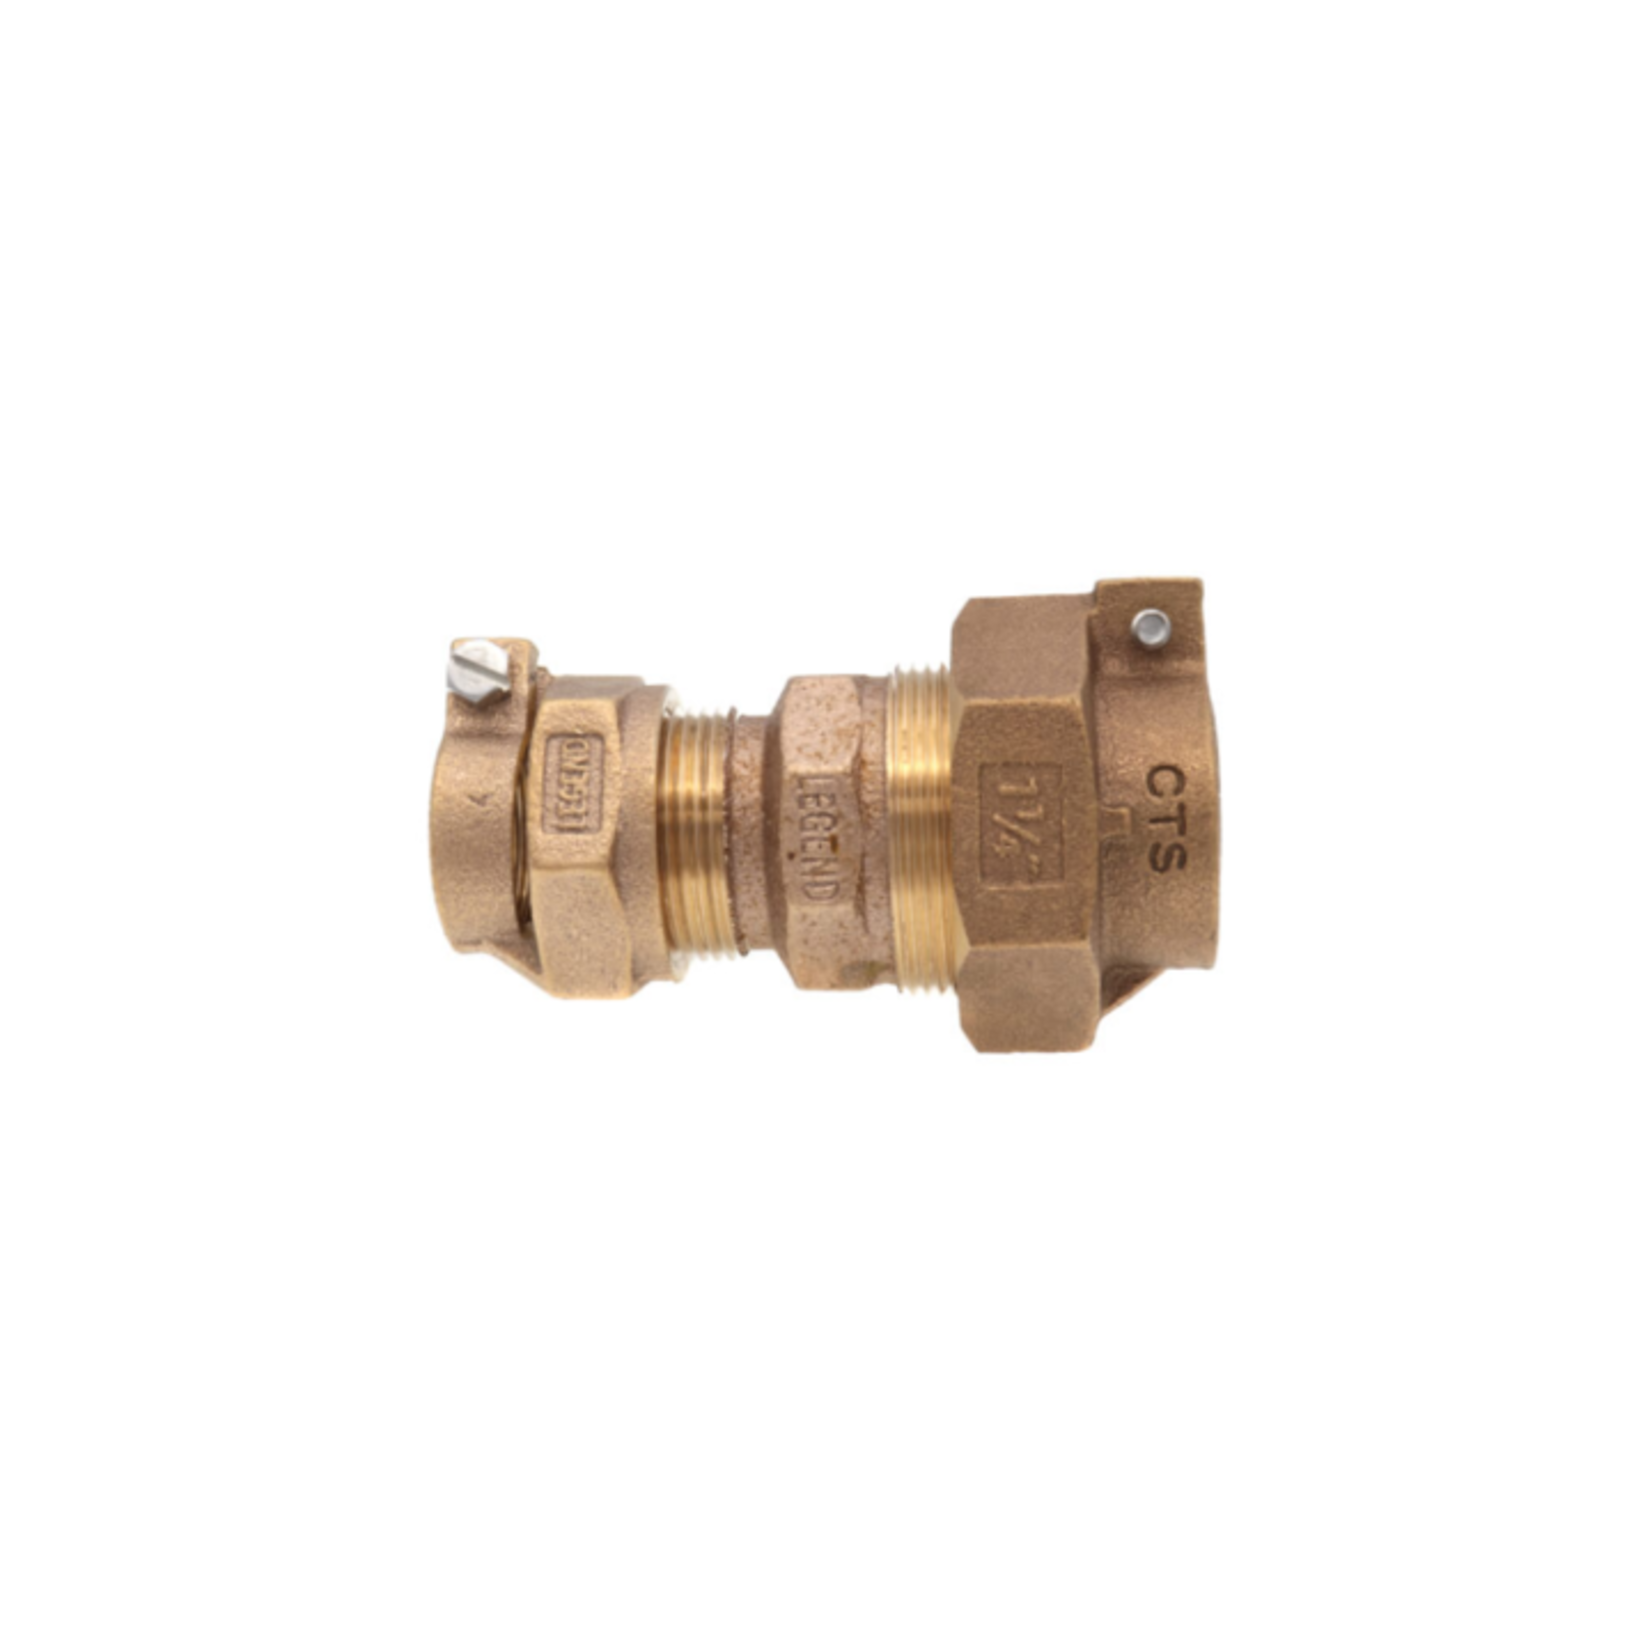 LEGEND VALVE 1 1/4 X 1 IN BRASS PACK JOINT COUPLING (CTS X CTS)